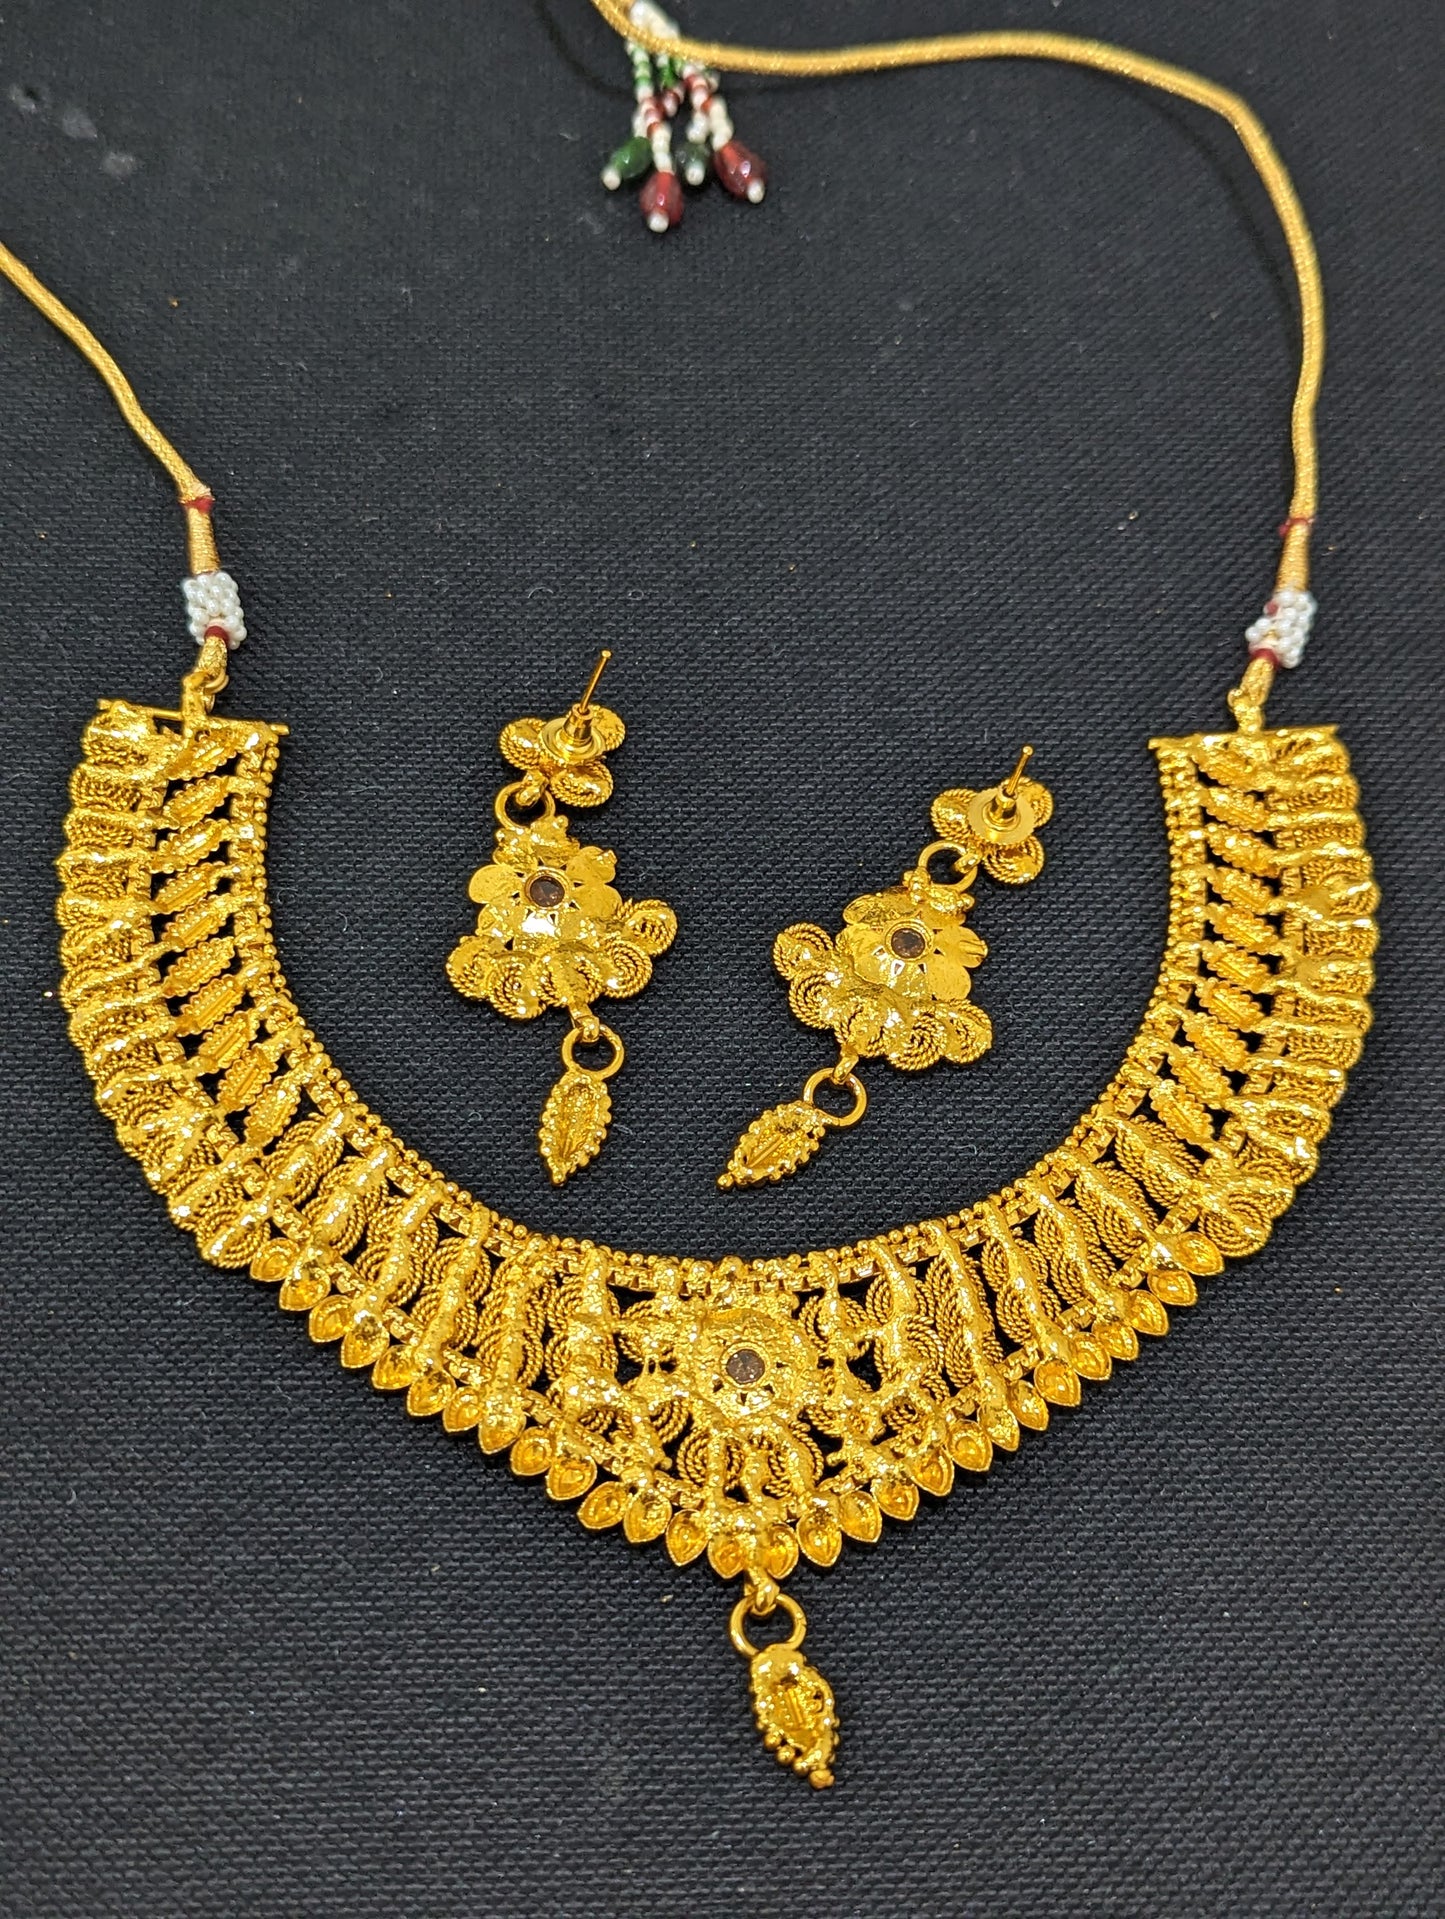 Real gold replica design Choker Necklace and Earrings set - Design 3